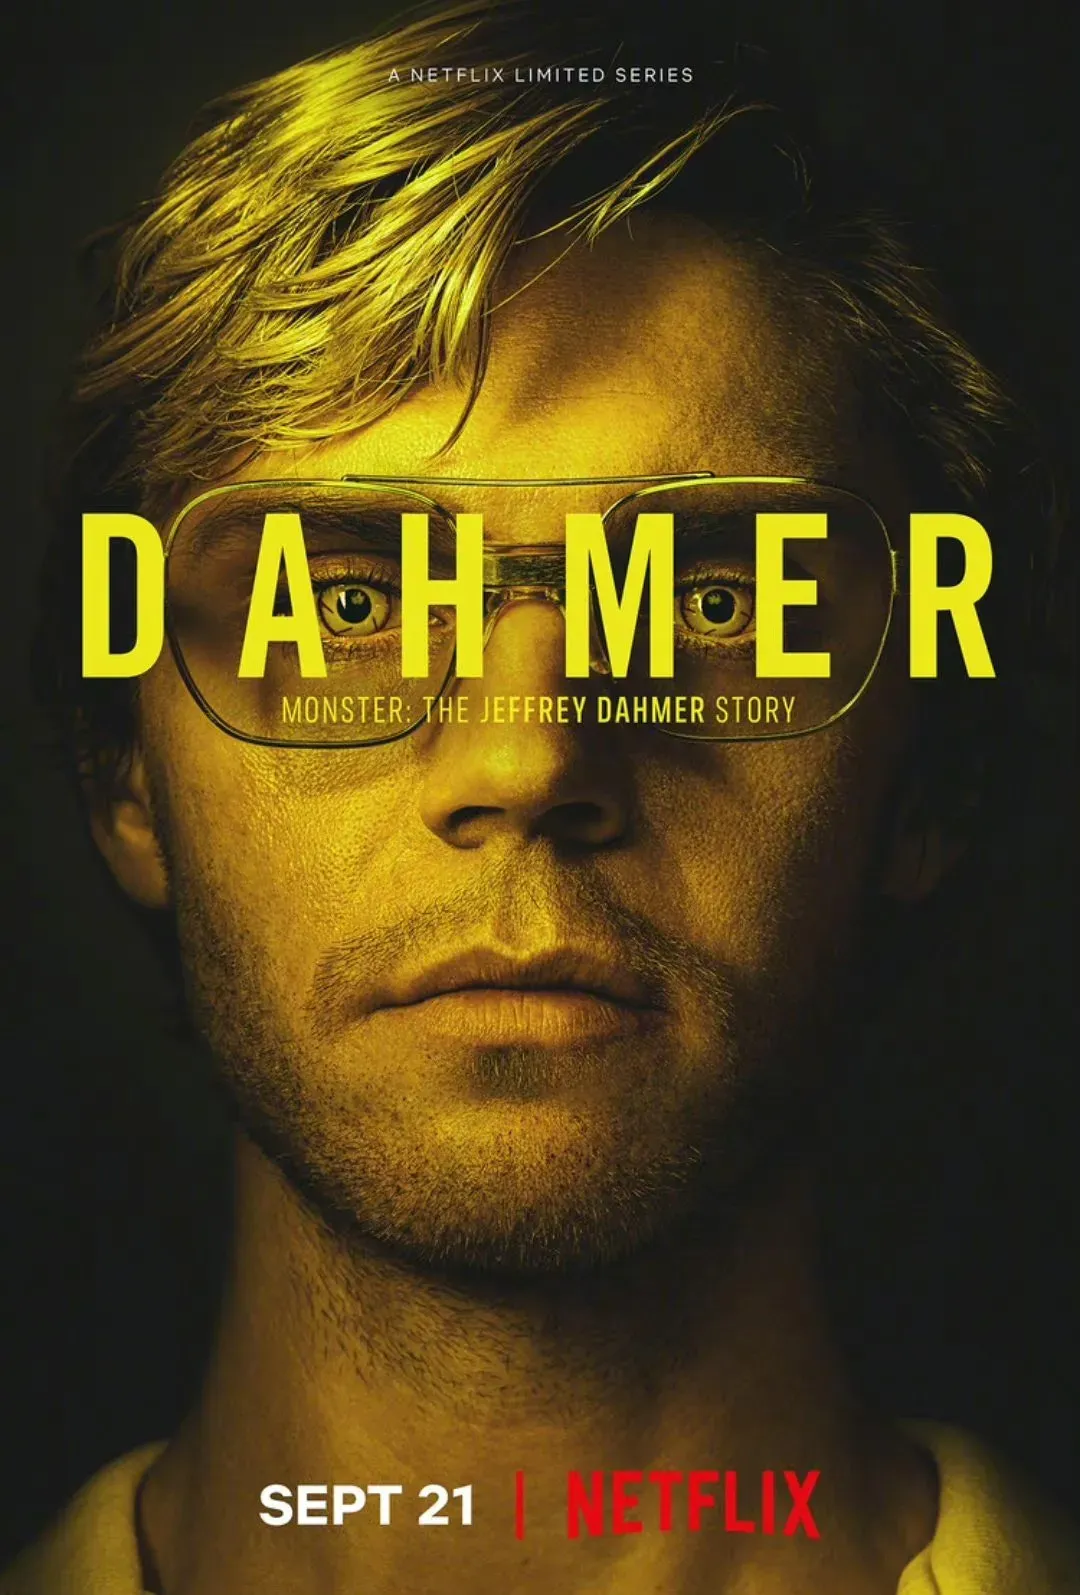 Netflix's new drama 'Monster: The Jeffrey Dahmer Story‎' releases official trailer and poster | FMV6